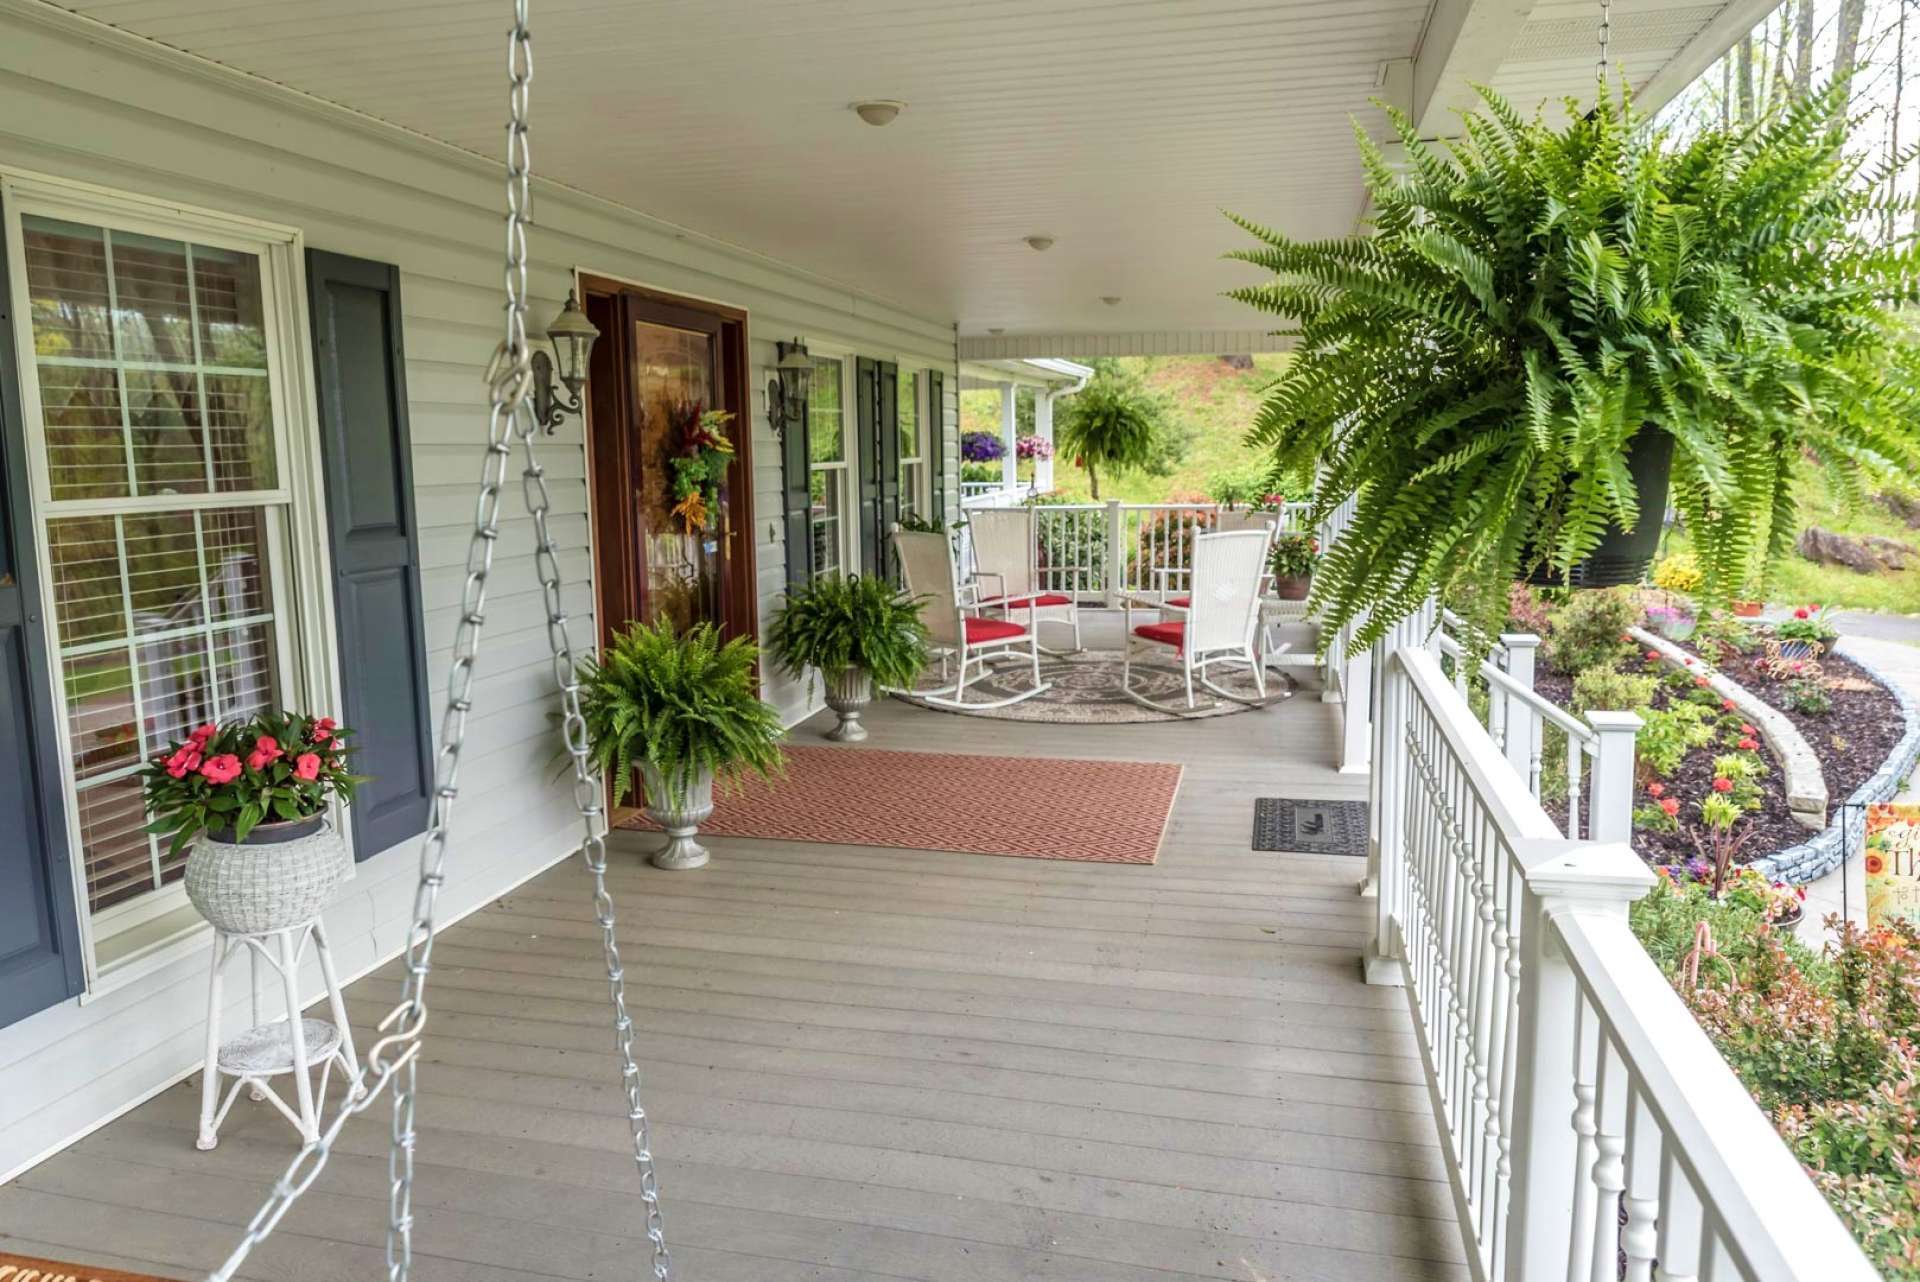 Enjoy the views of the countryside and creek from the covered rocking chair front porch.